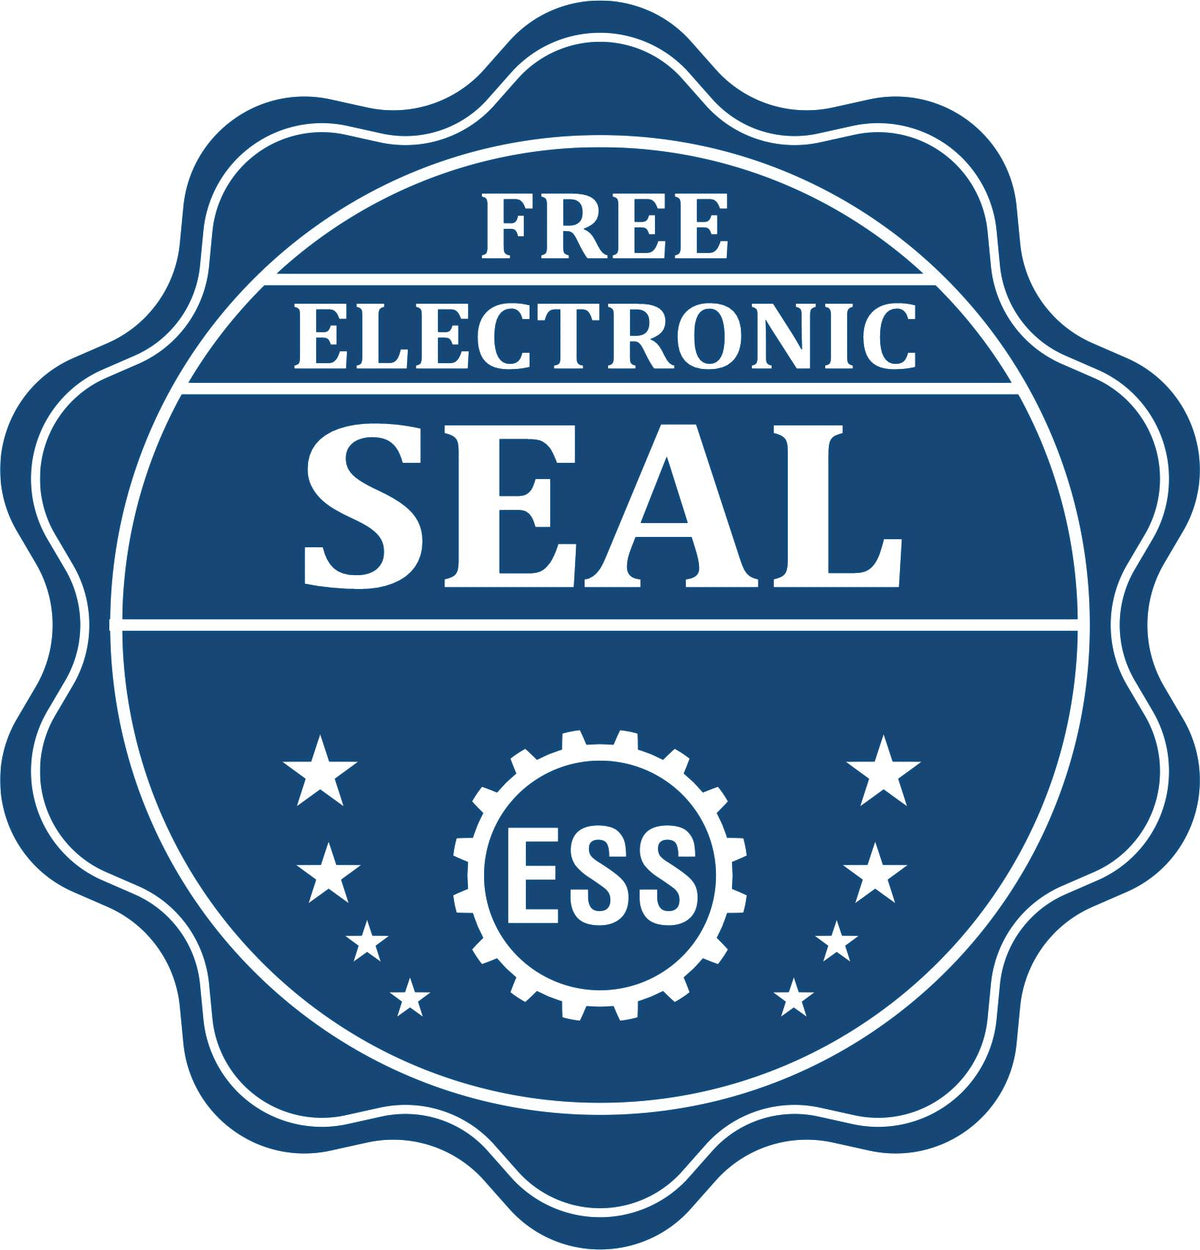 A badge showing a free electronic seal for the Heavy Duty Cast Iron Utah Architect Embosser with stars and the ESS gear on the emblem.